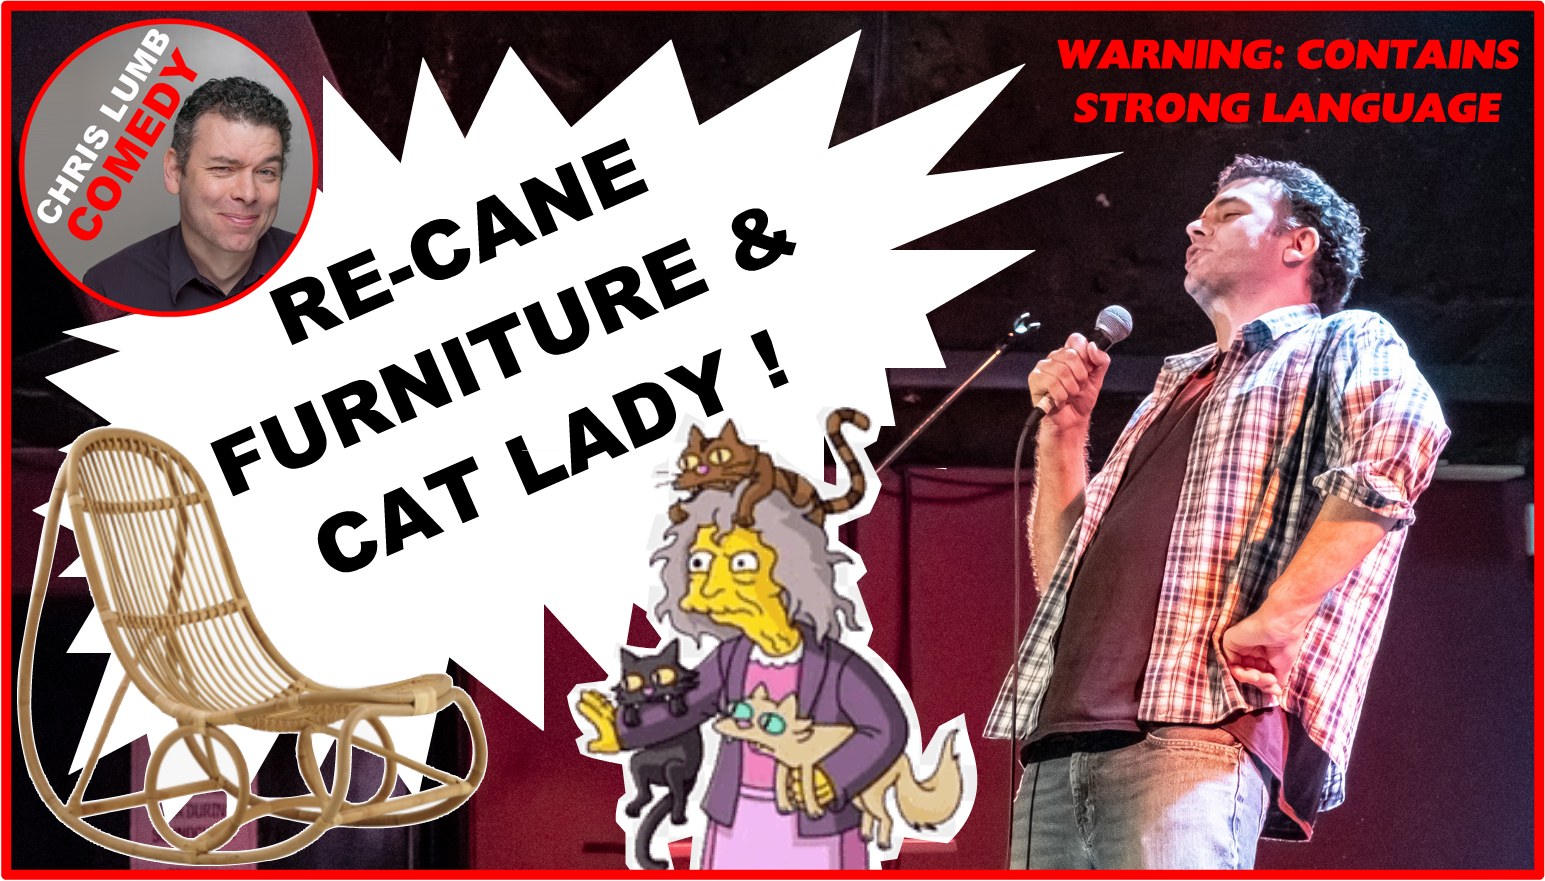 Chris Lumb Comedy "Re-cane Furniture and Cat Lady"